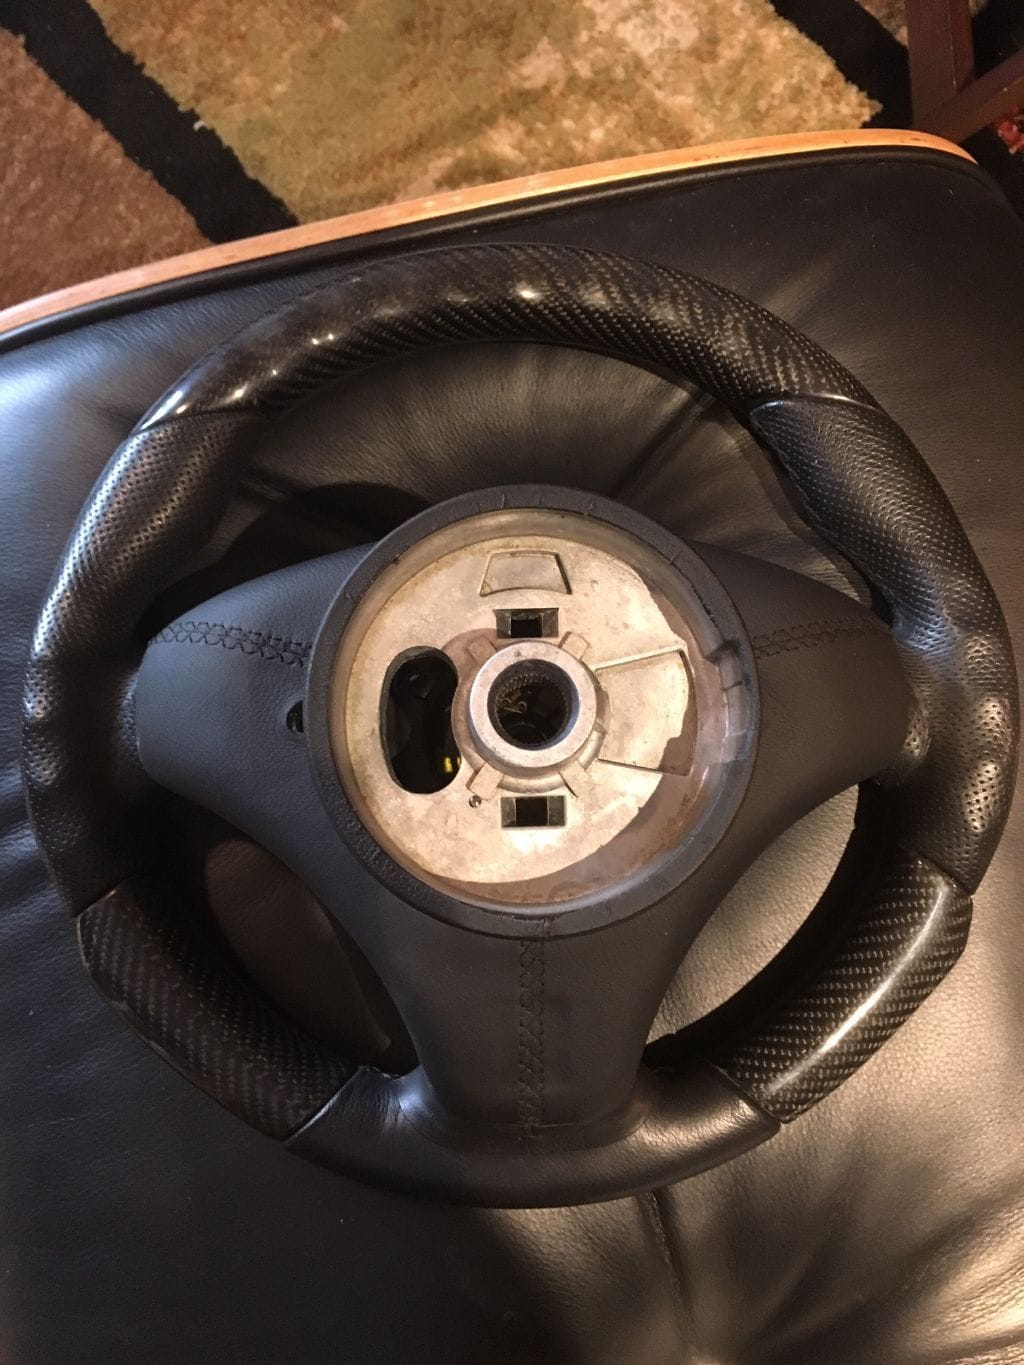 Accessories - FS: FVD Airbag Steering Wheel, Black Perforated leather/CF & Matching Shift Knob - Used - 1999 to 2005 Porsche 911 - Denver, CO 80221, United States